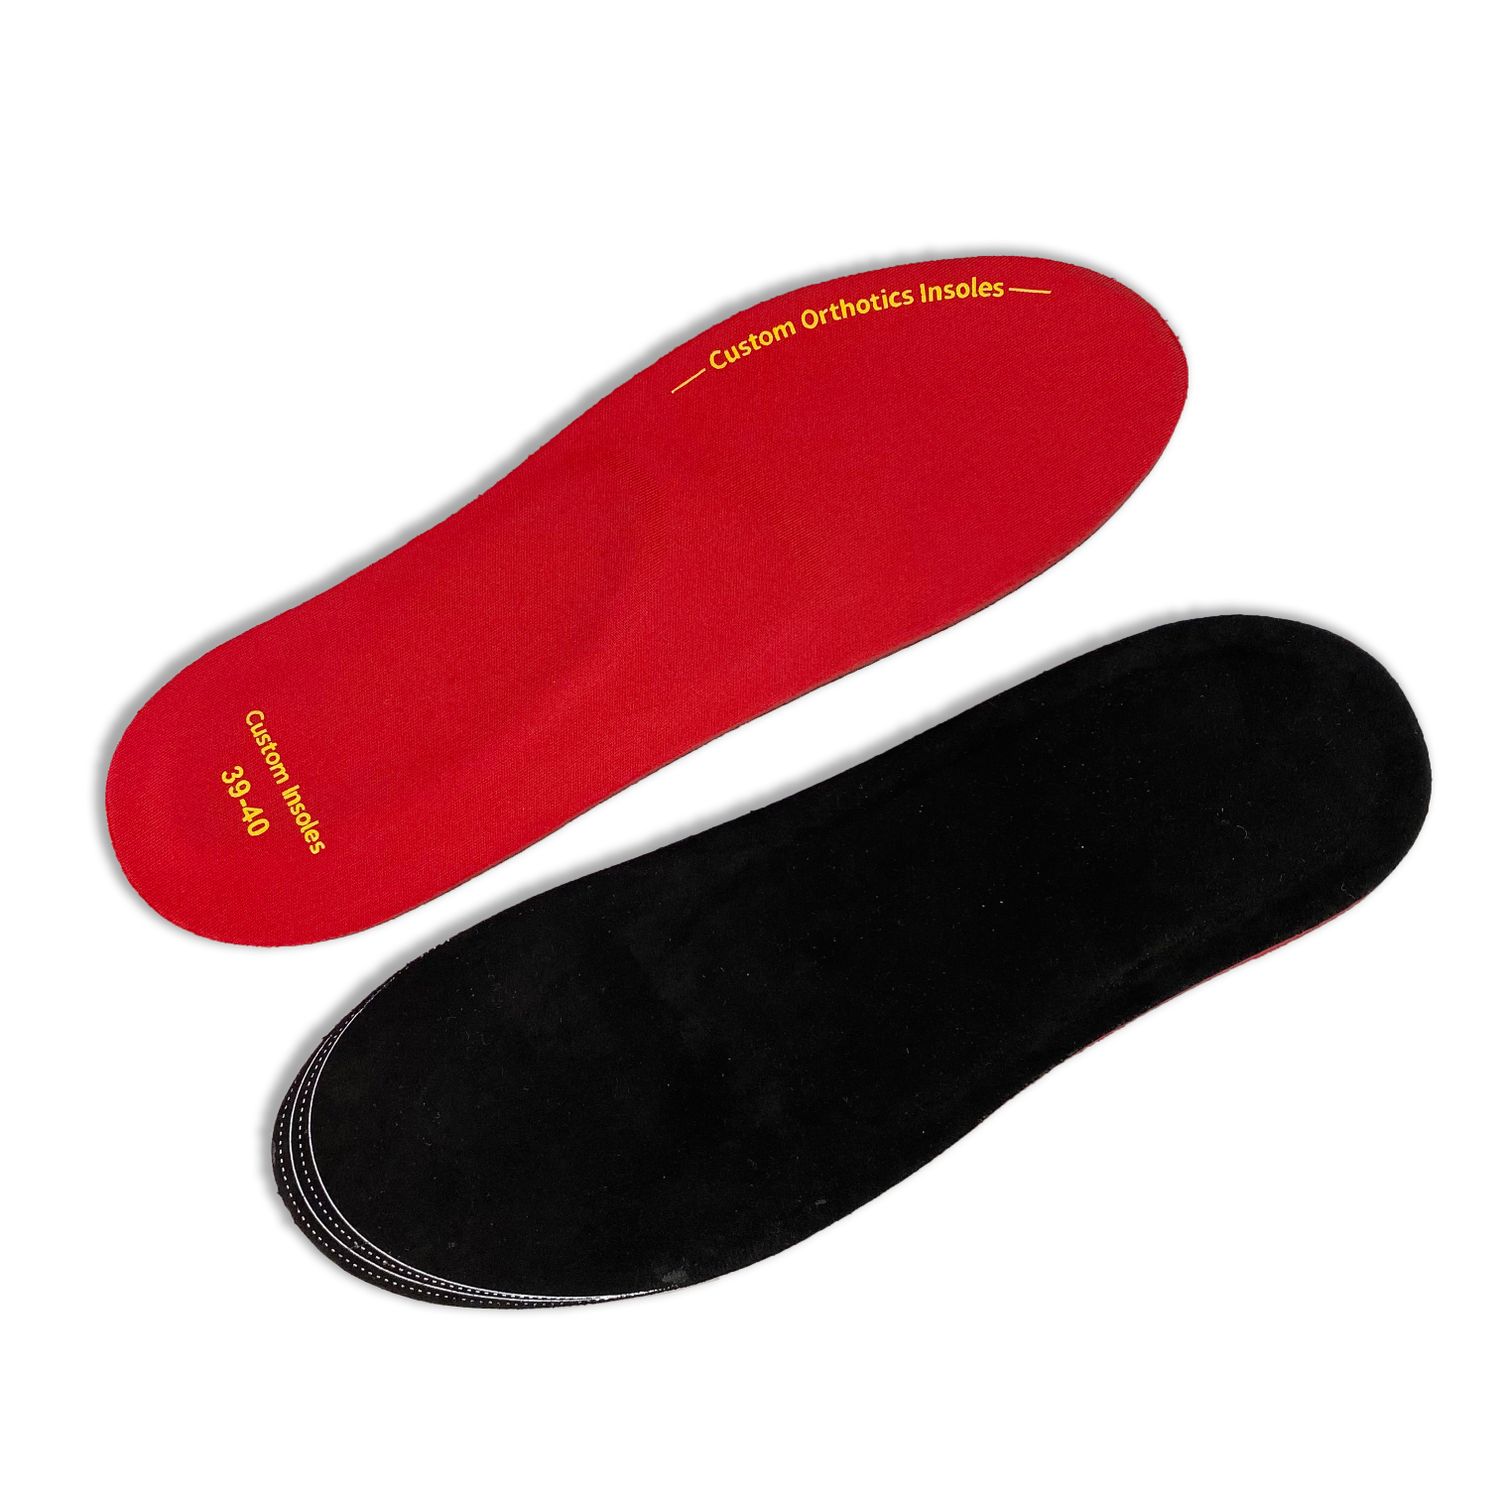 Lee-Mat red and black custom molded arch supports